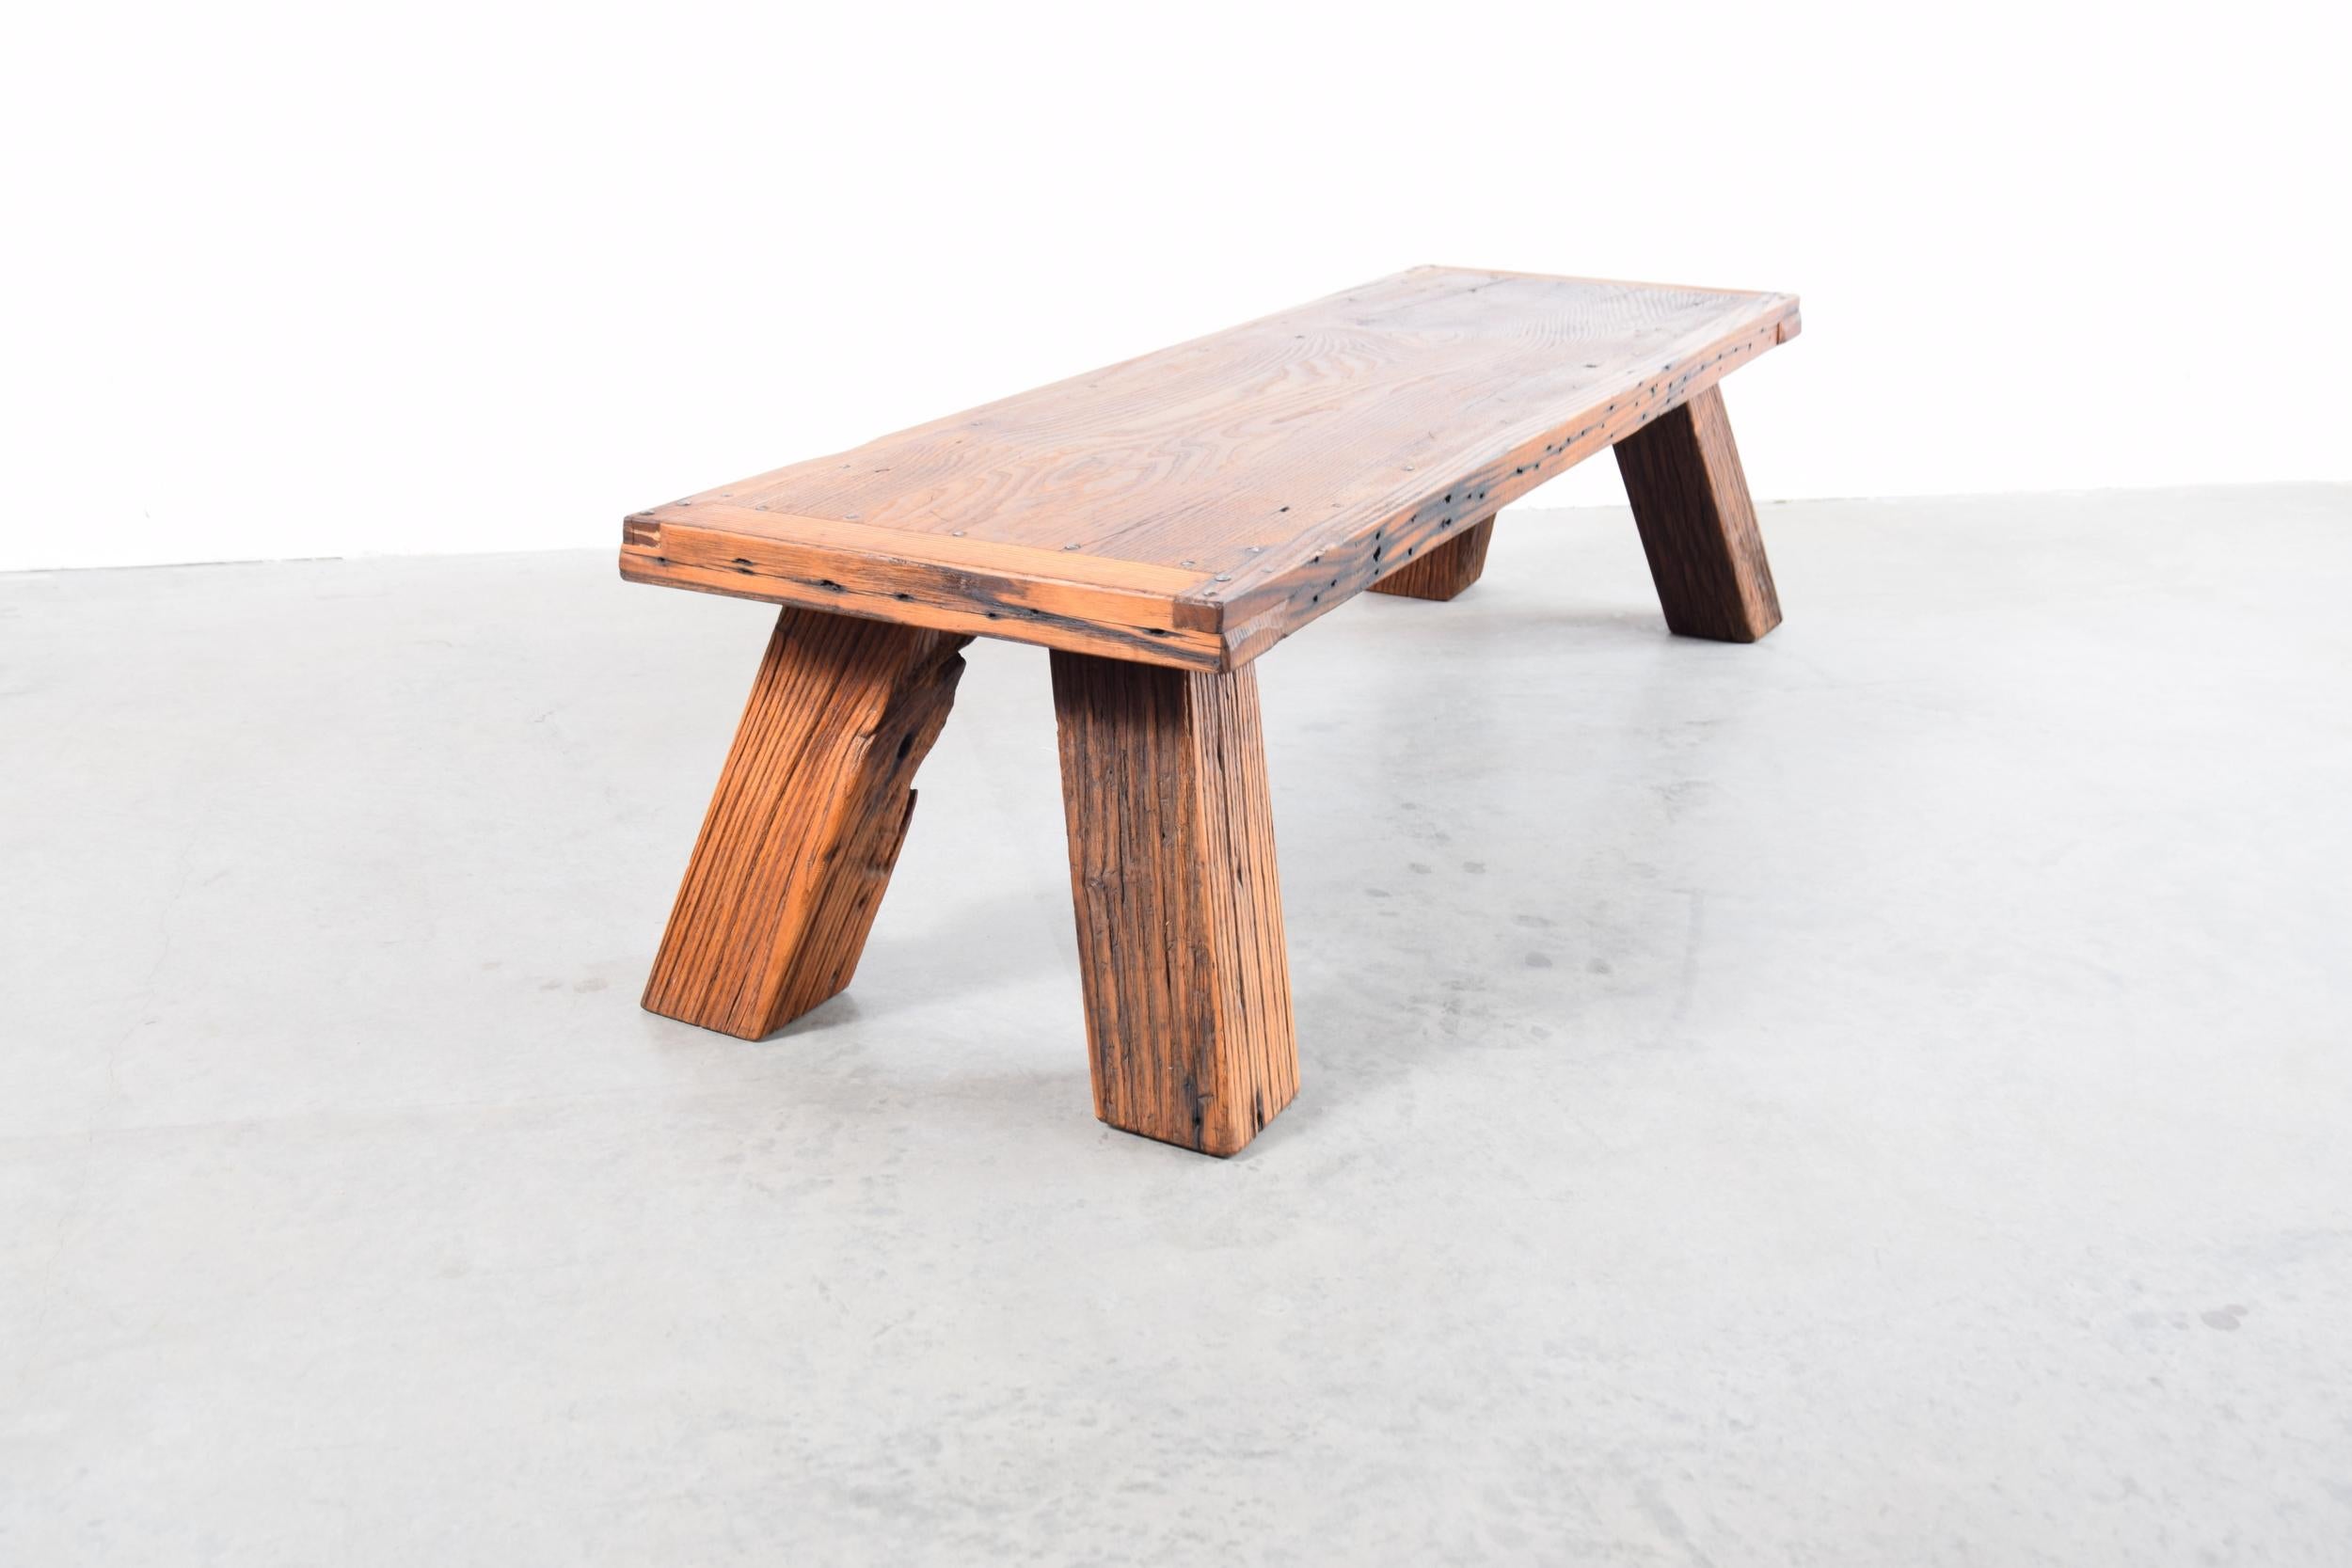 Rustic Solid Chestnut Coffee Table or Bench